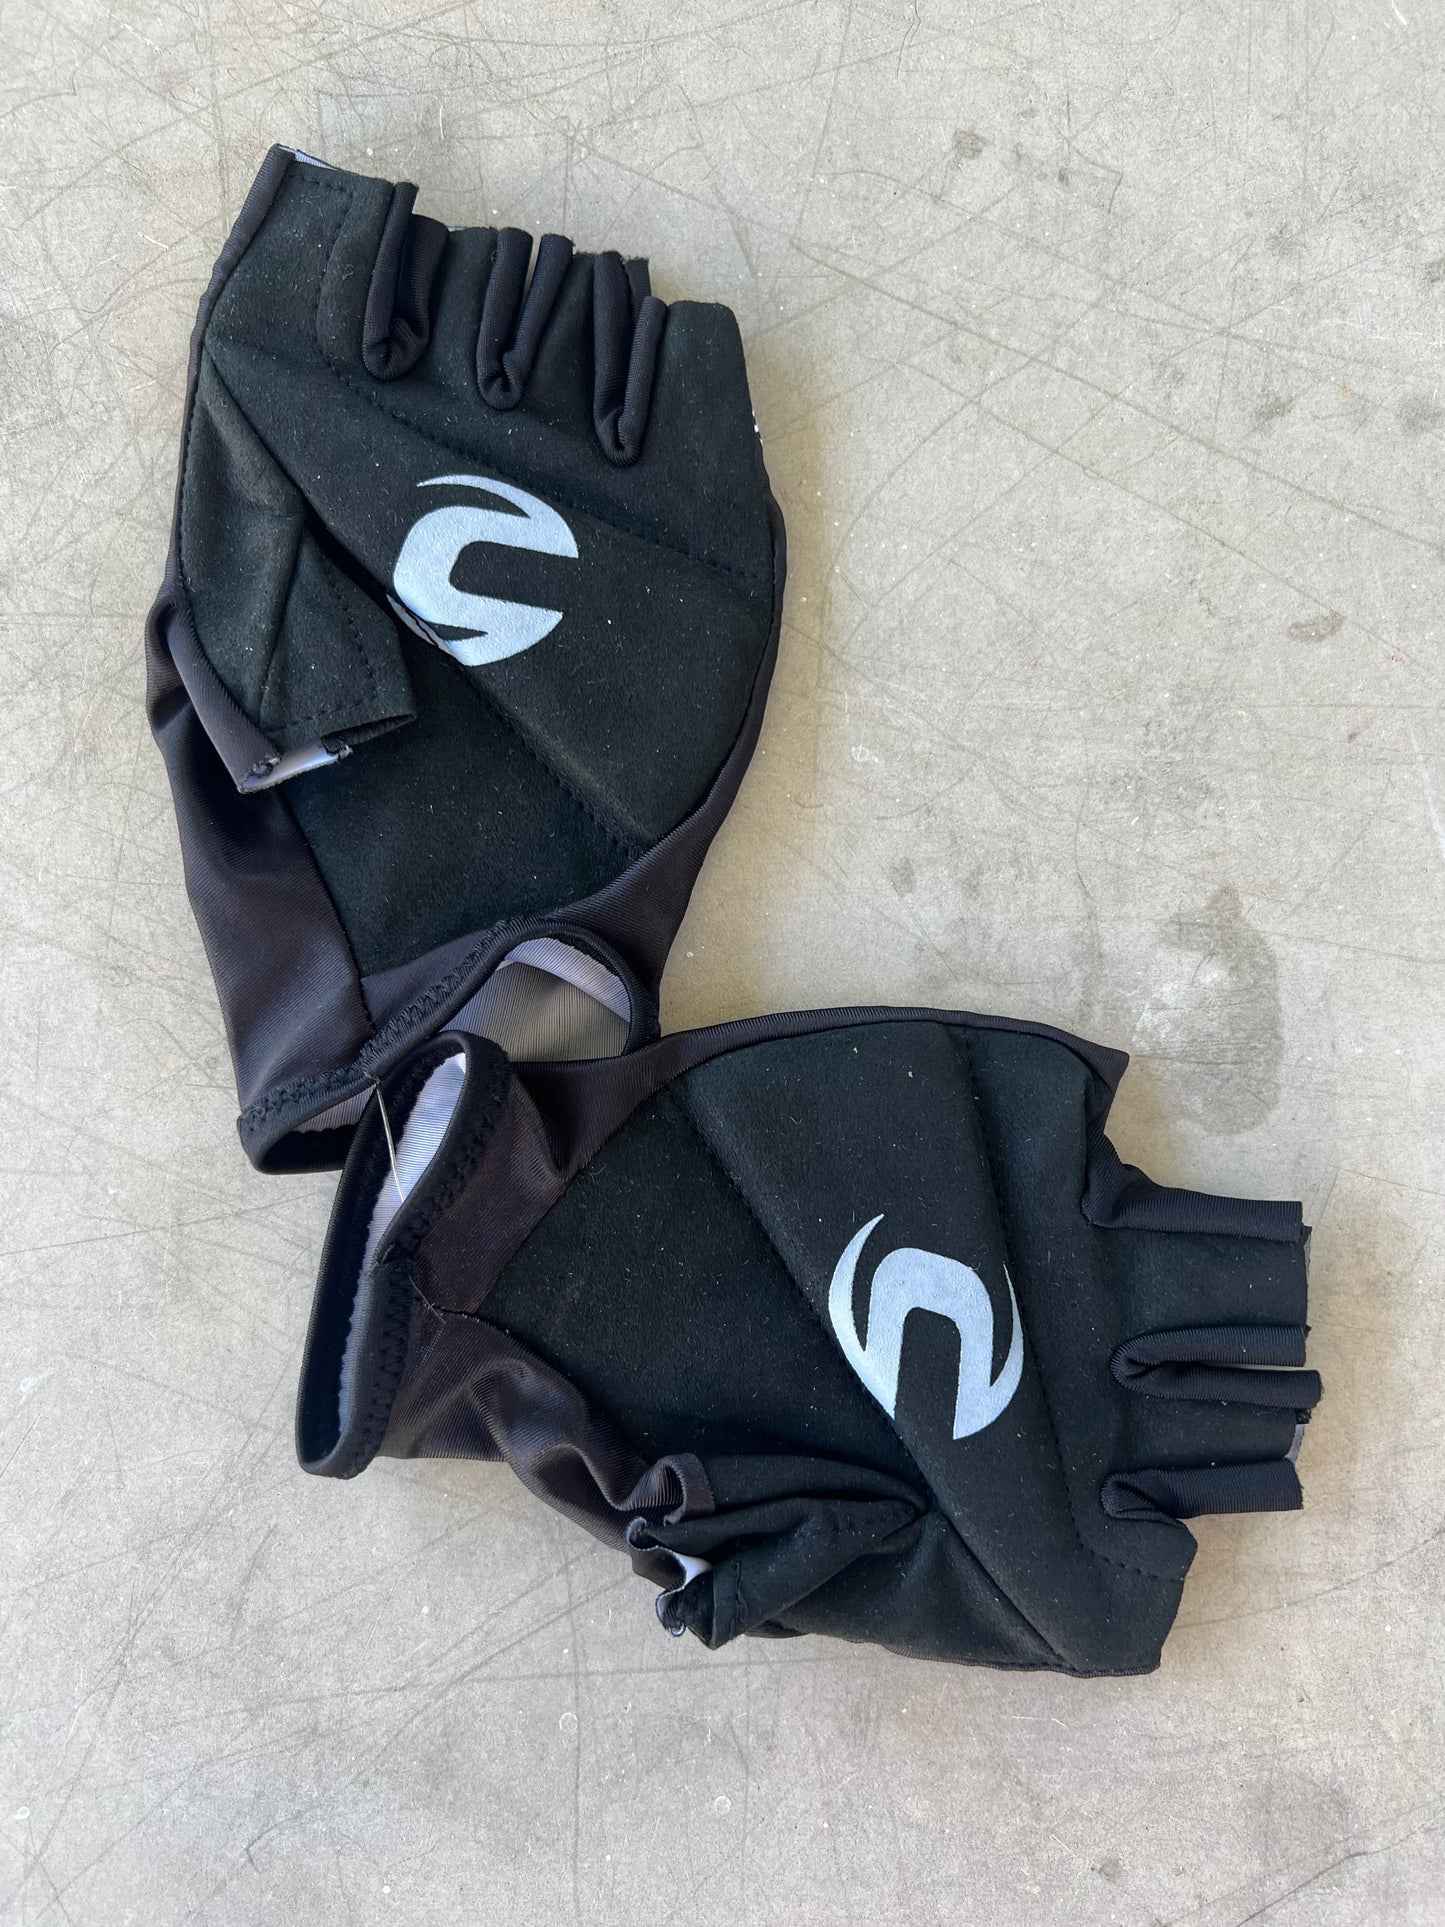 EF Pro Cycling 2020 | Rapha Padded Cycling Gloves - Giro Edition | Black | S | Team Issued Pro Kit